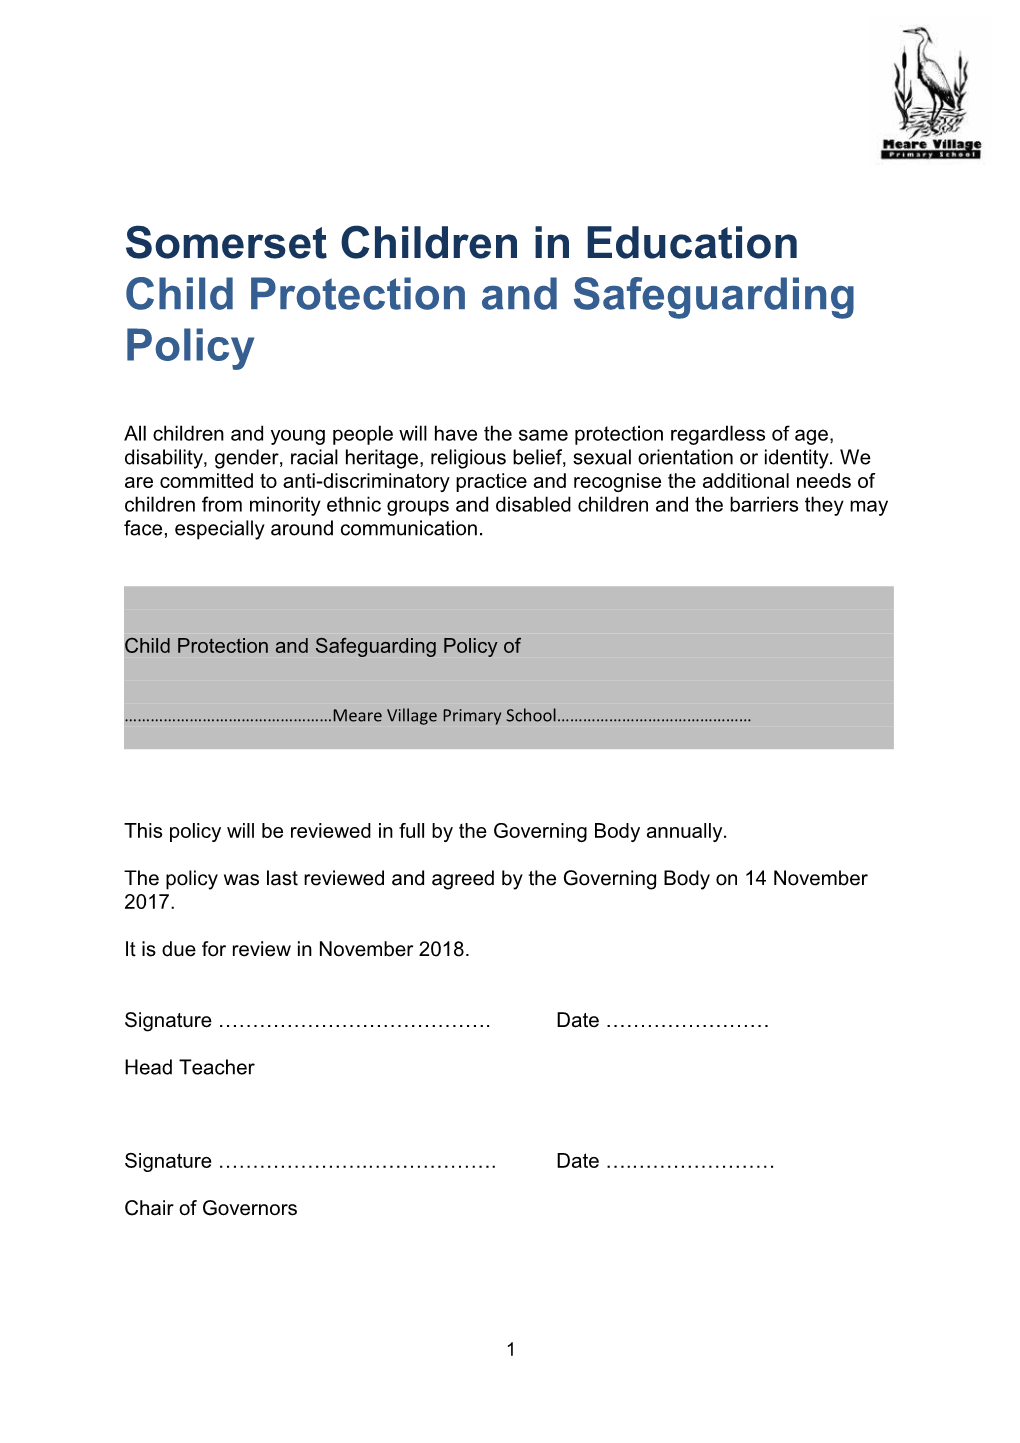 Somerset Children in Education Child Protection and Safeguarding Policy